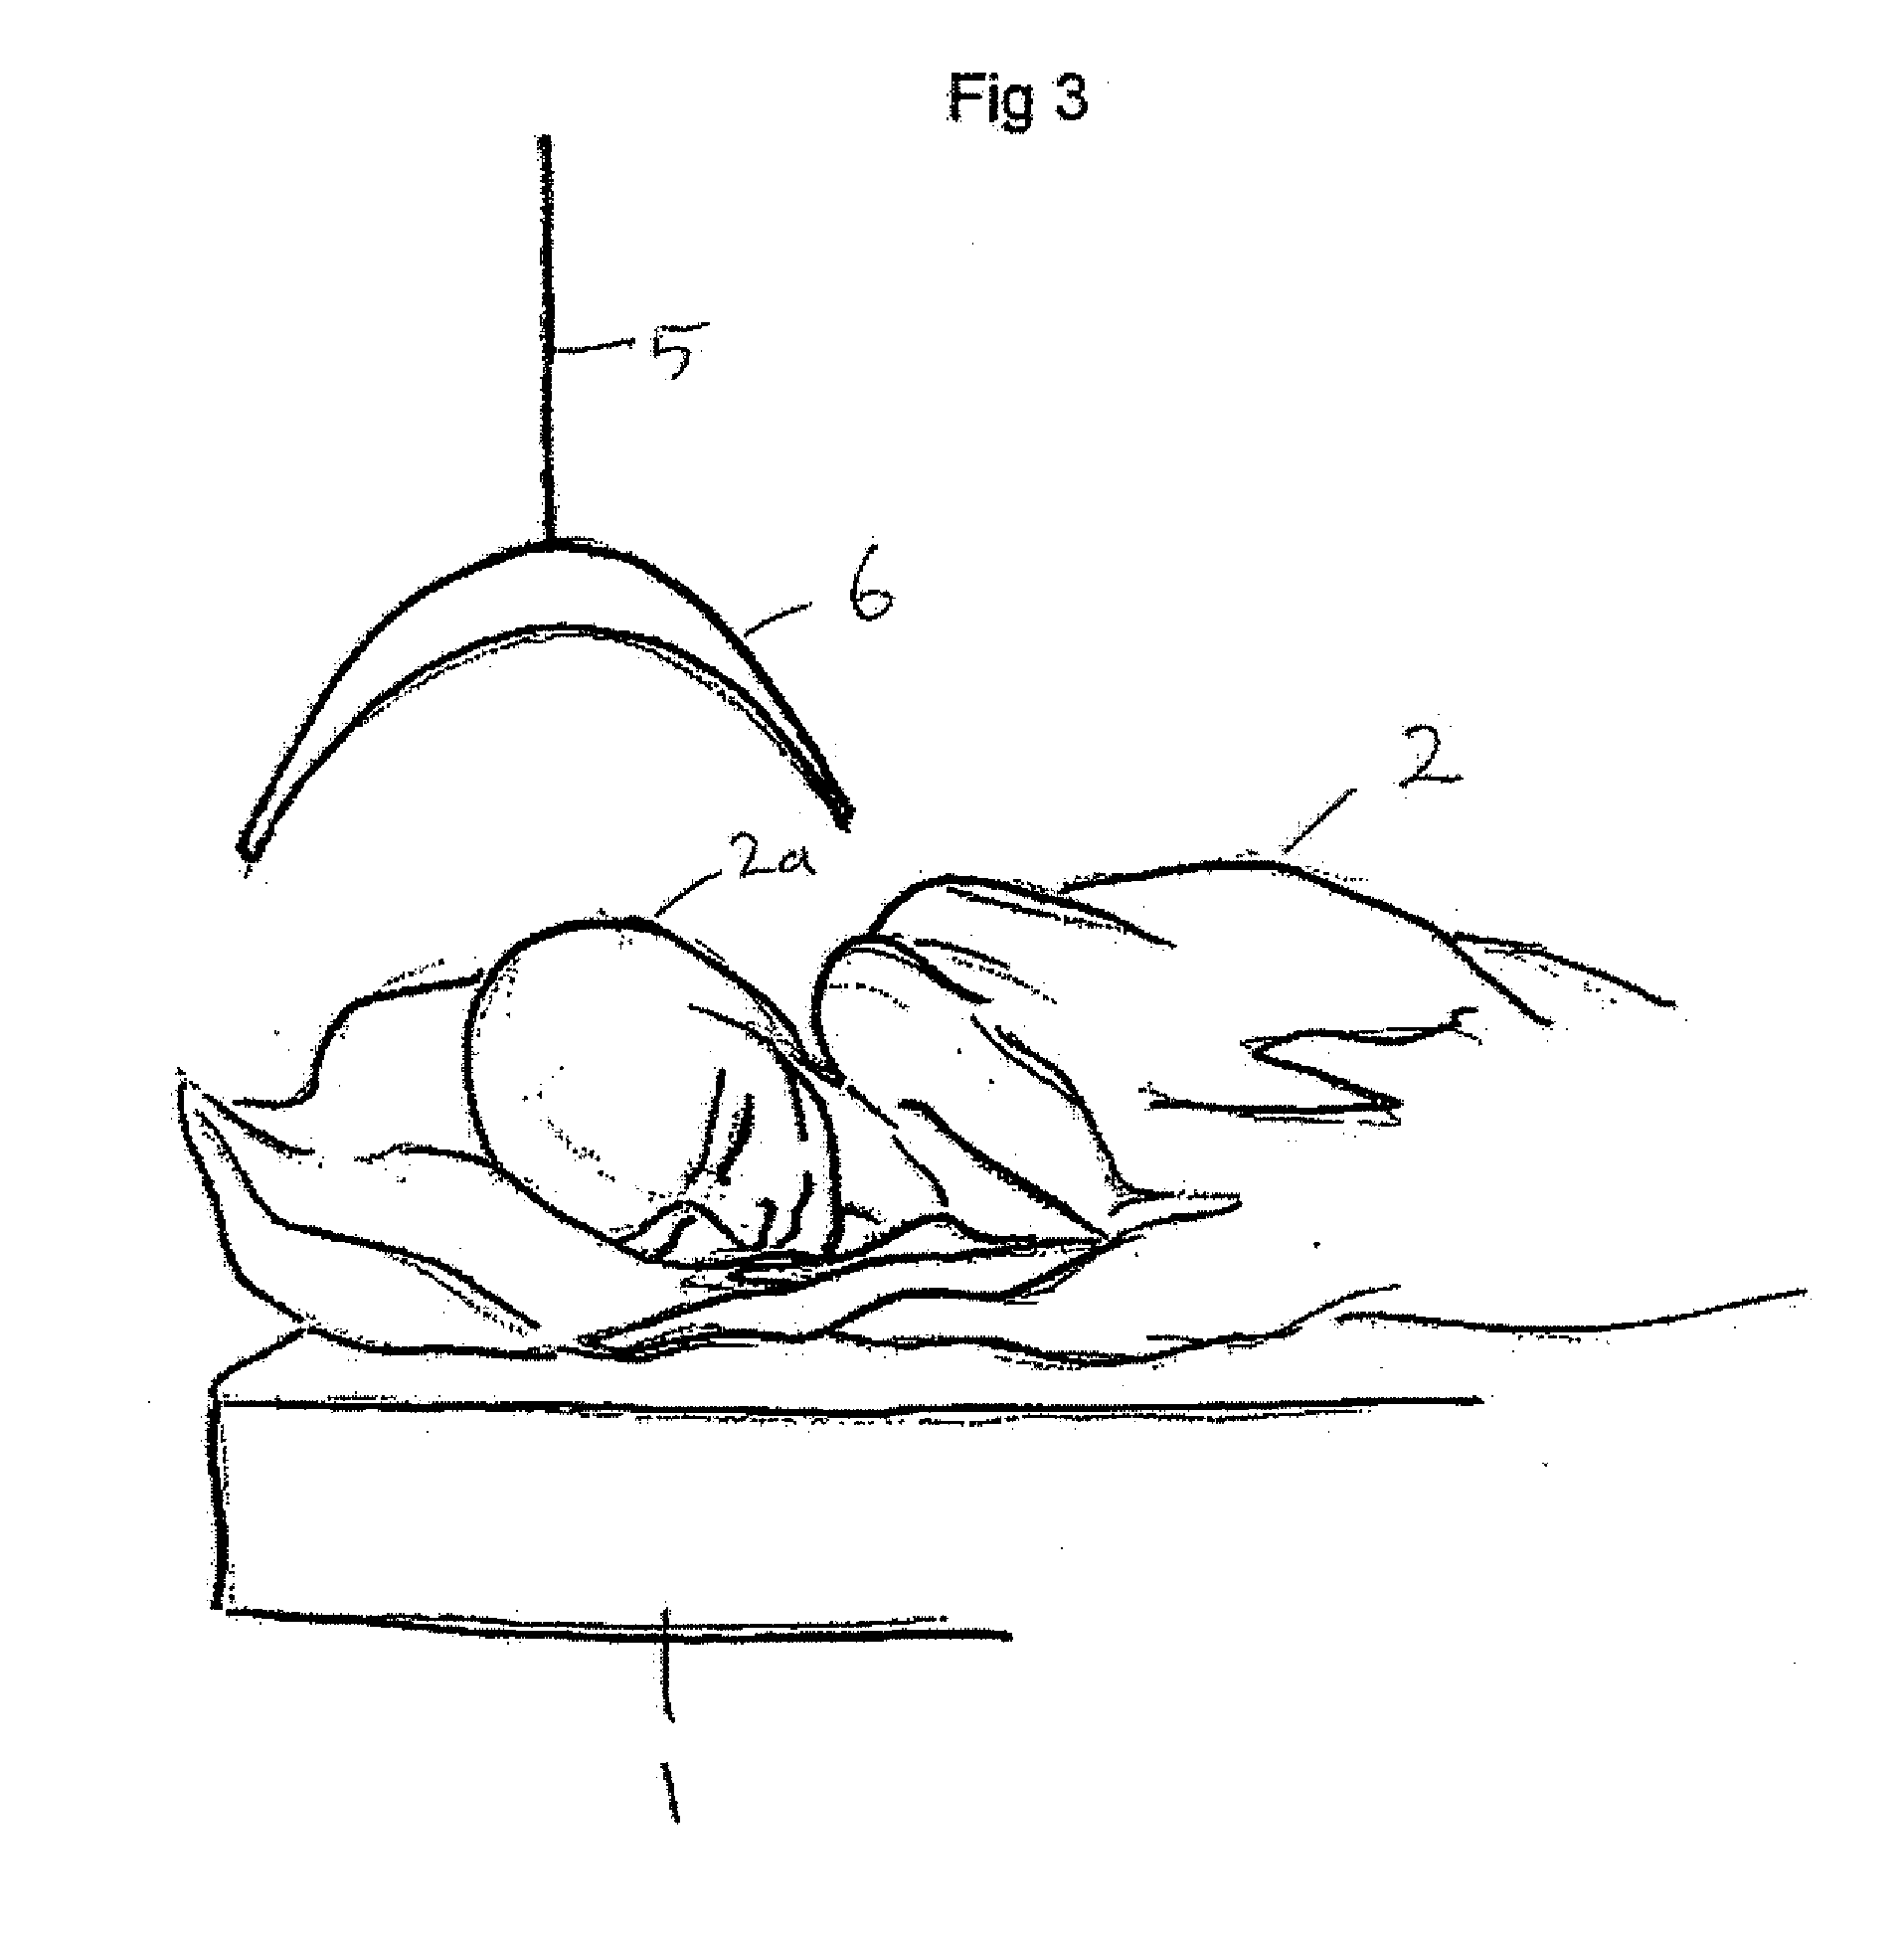 Treatment or Therapy Apparatus